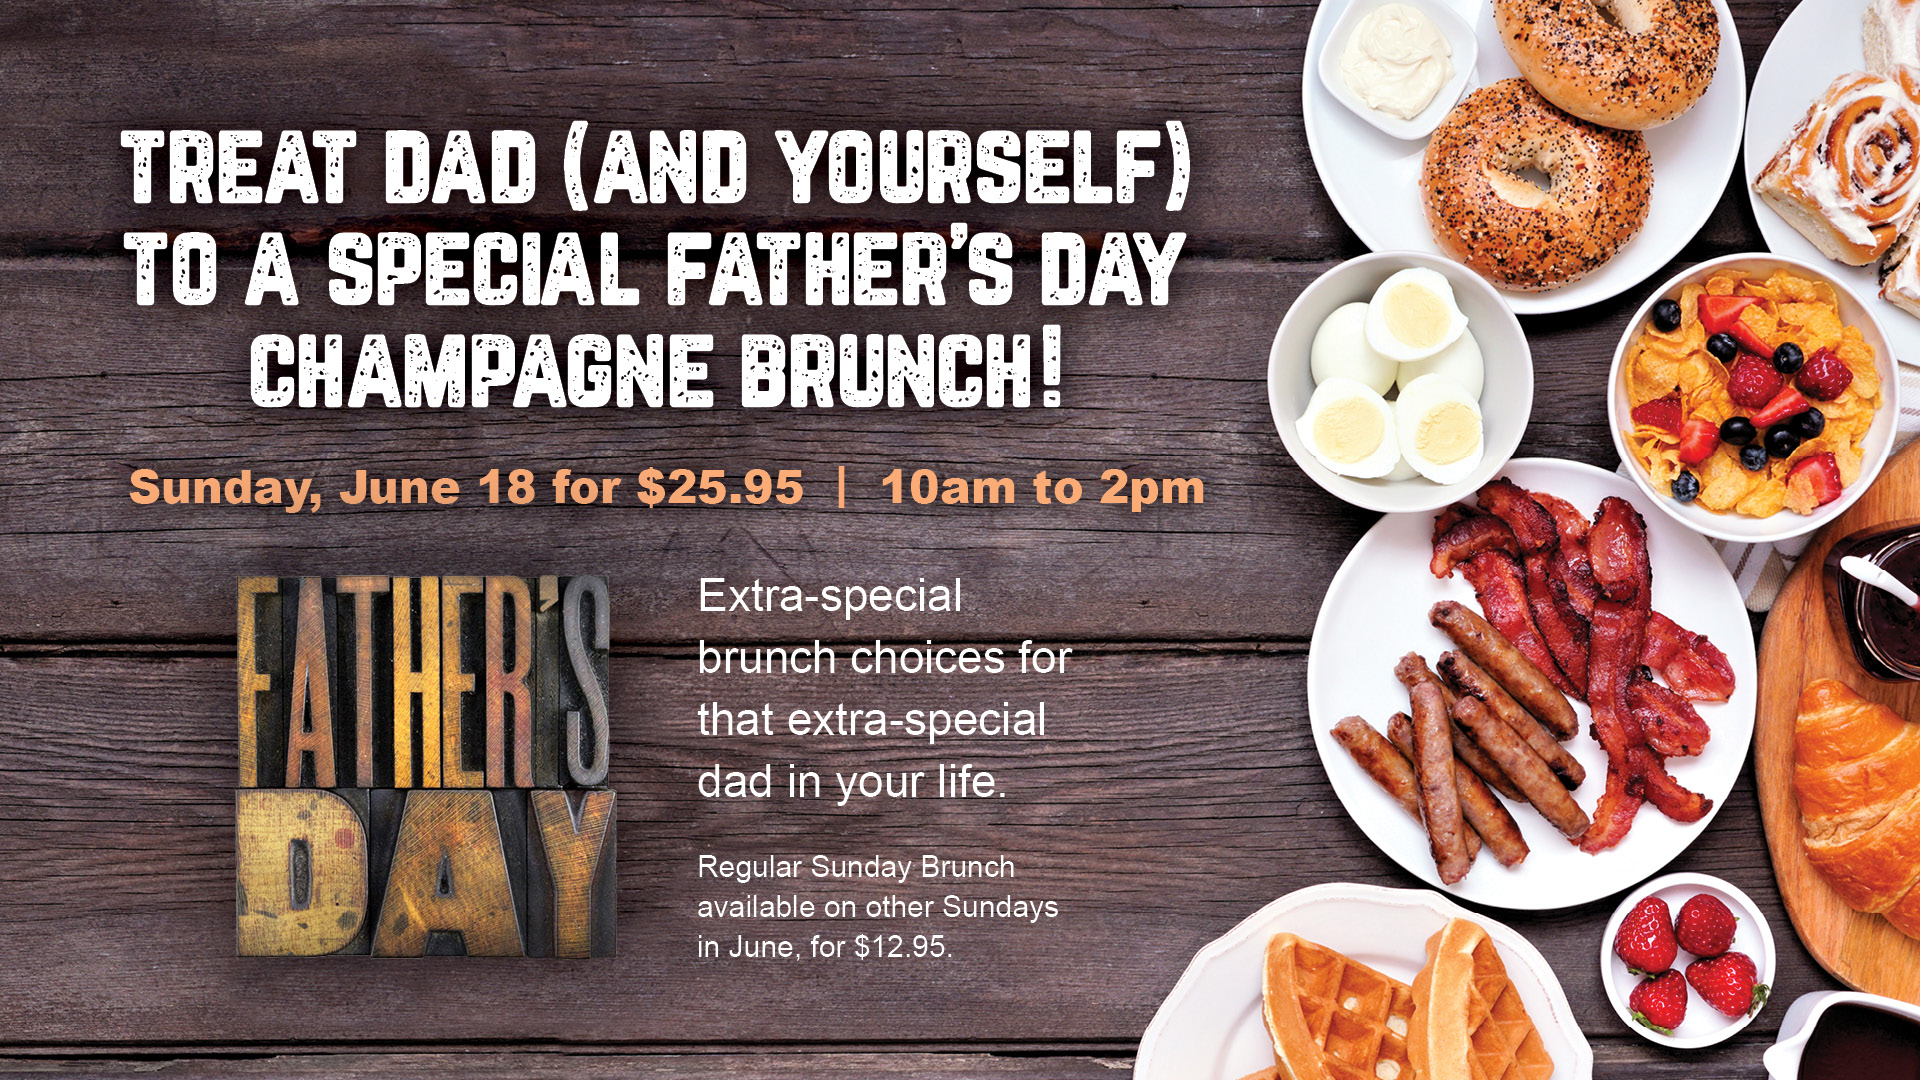 Treat Dad (and yourself) to a special Father's Day Champagne Brunch! Sunday, June 18 for $25.95. 10am to 2pm. Extra-special bunch choices for that extra-special dad in your life. Regular Sunday Brunch available on other Sundays in June, for $12.95.